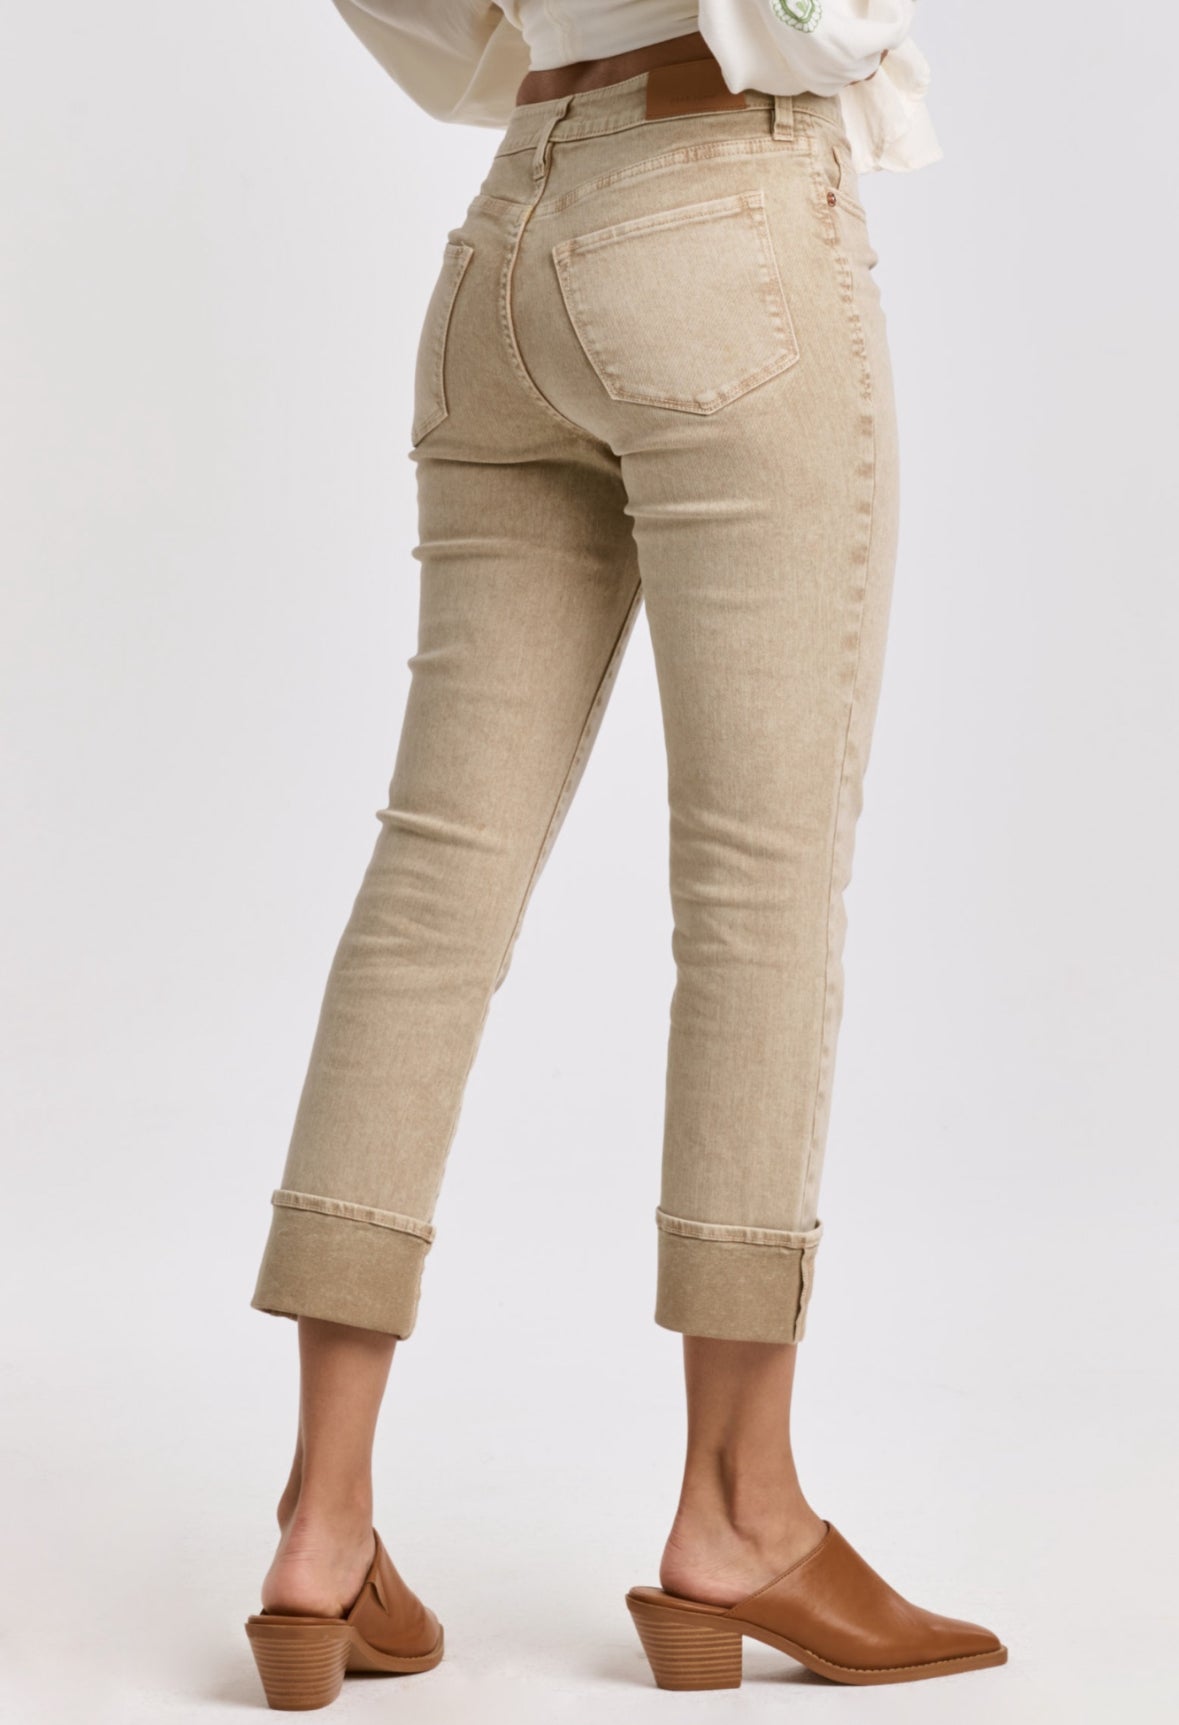 Golden Road Blaire Cuffed Jeans